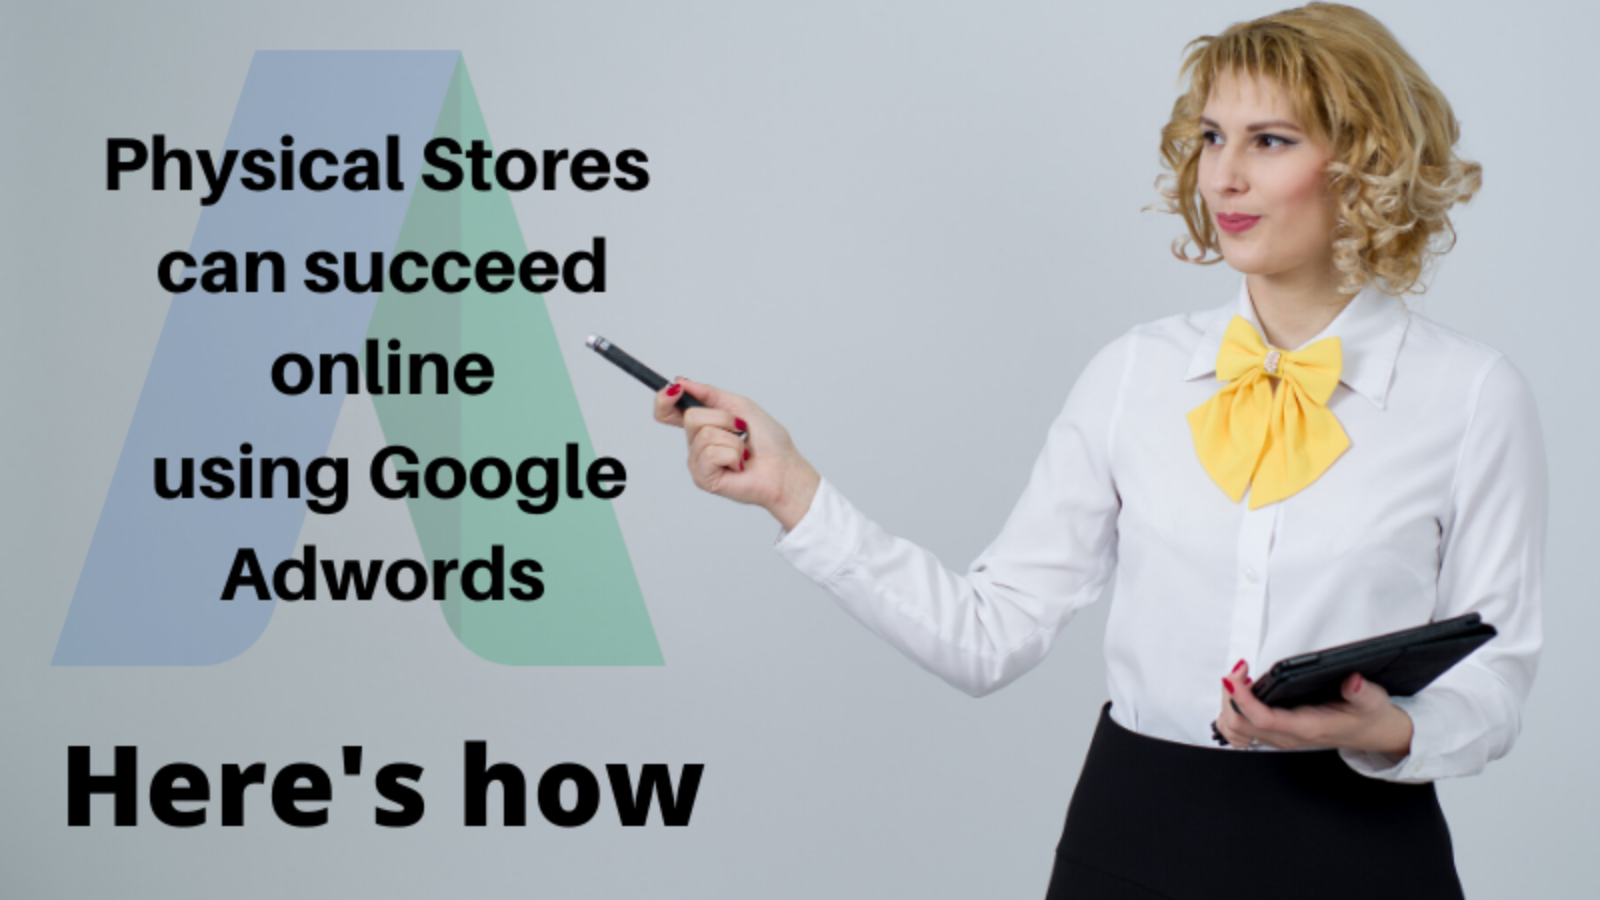 Physical-Stores-can-succeed-online-using-Google-Adwords-Heres-how.